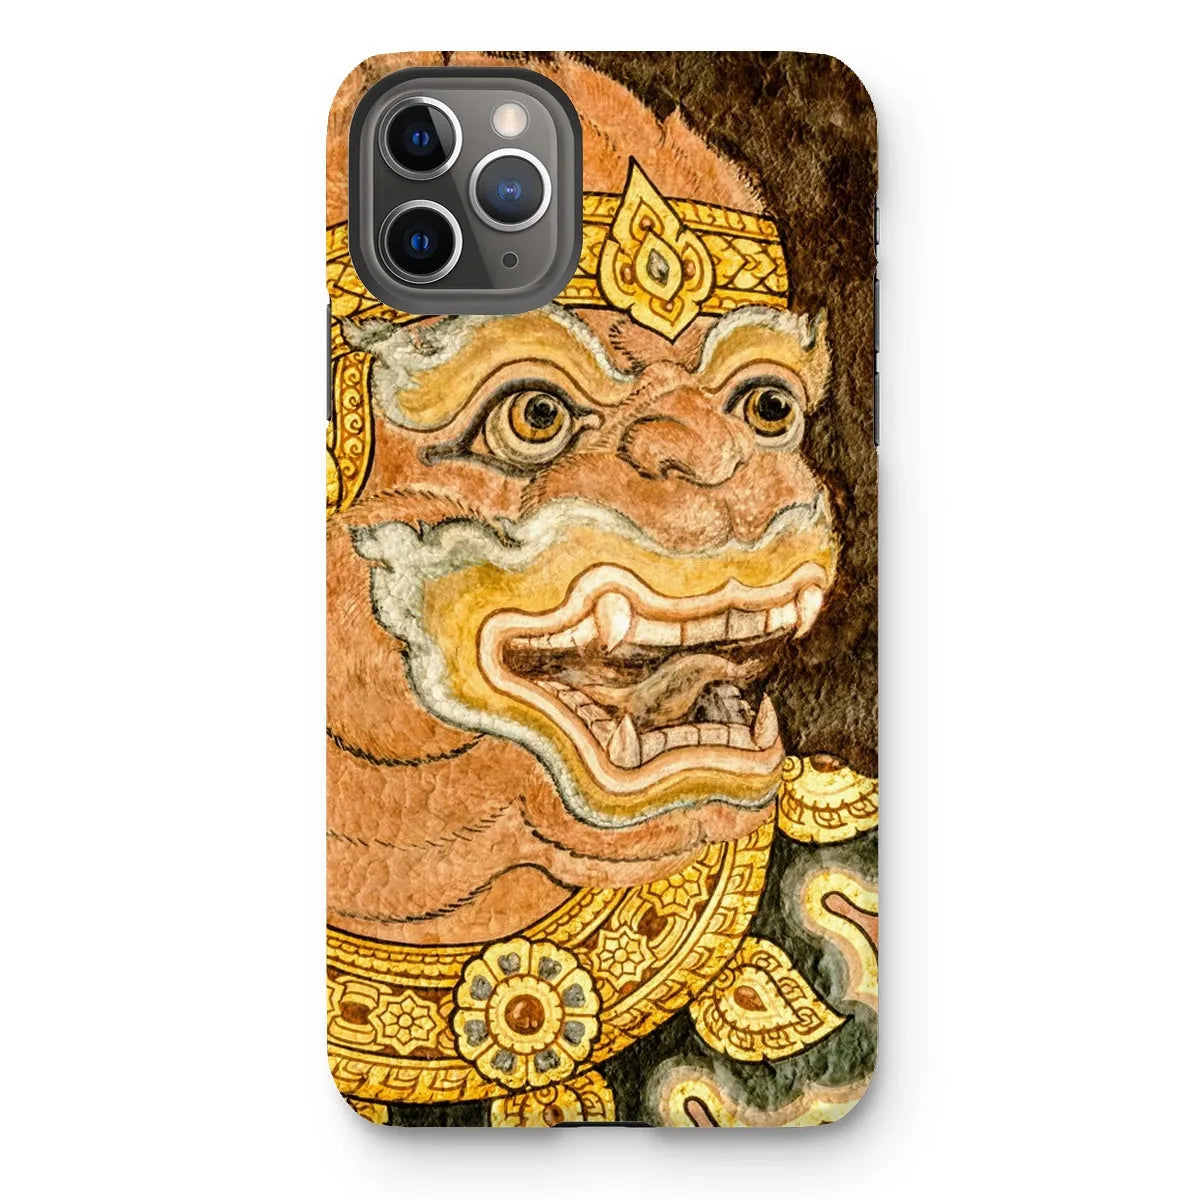 Monkey See - Traditional Thai Aesthetic Art Phone Case - Iphone 11 Pro Max / Matte - Mobile Phone Cases - Aesthetic Art